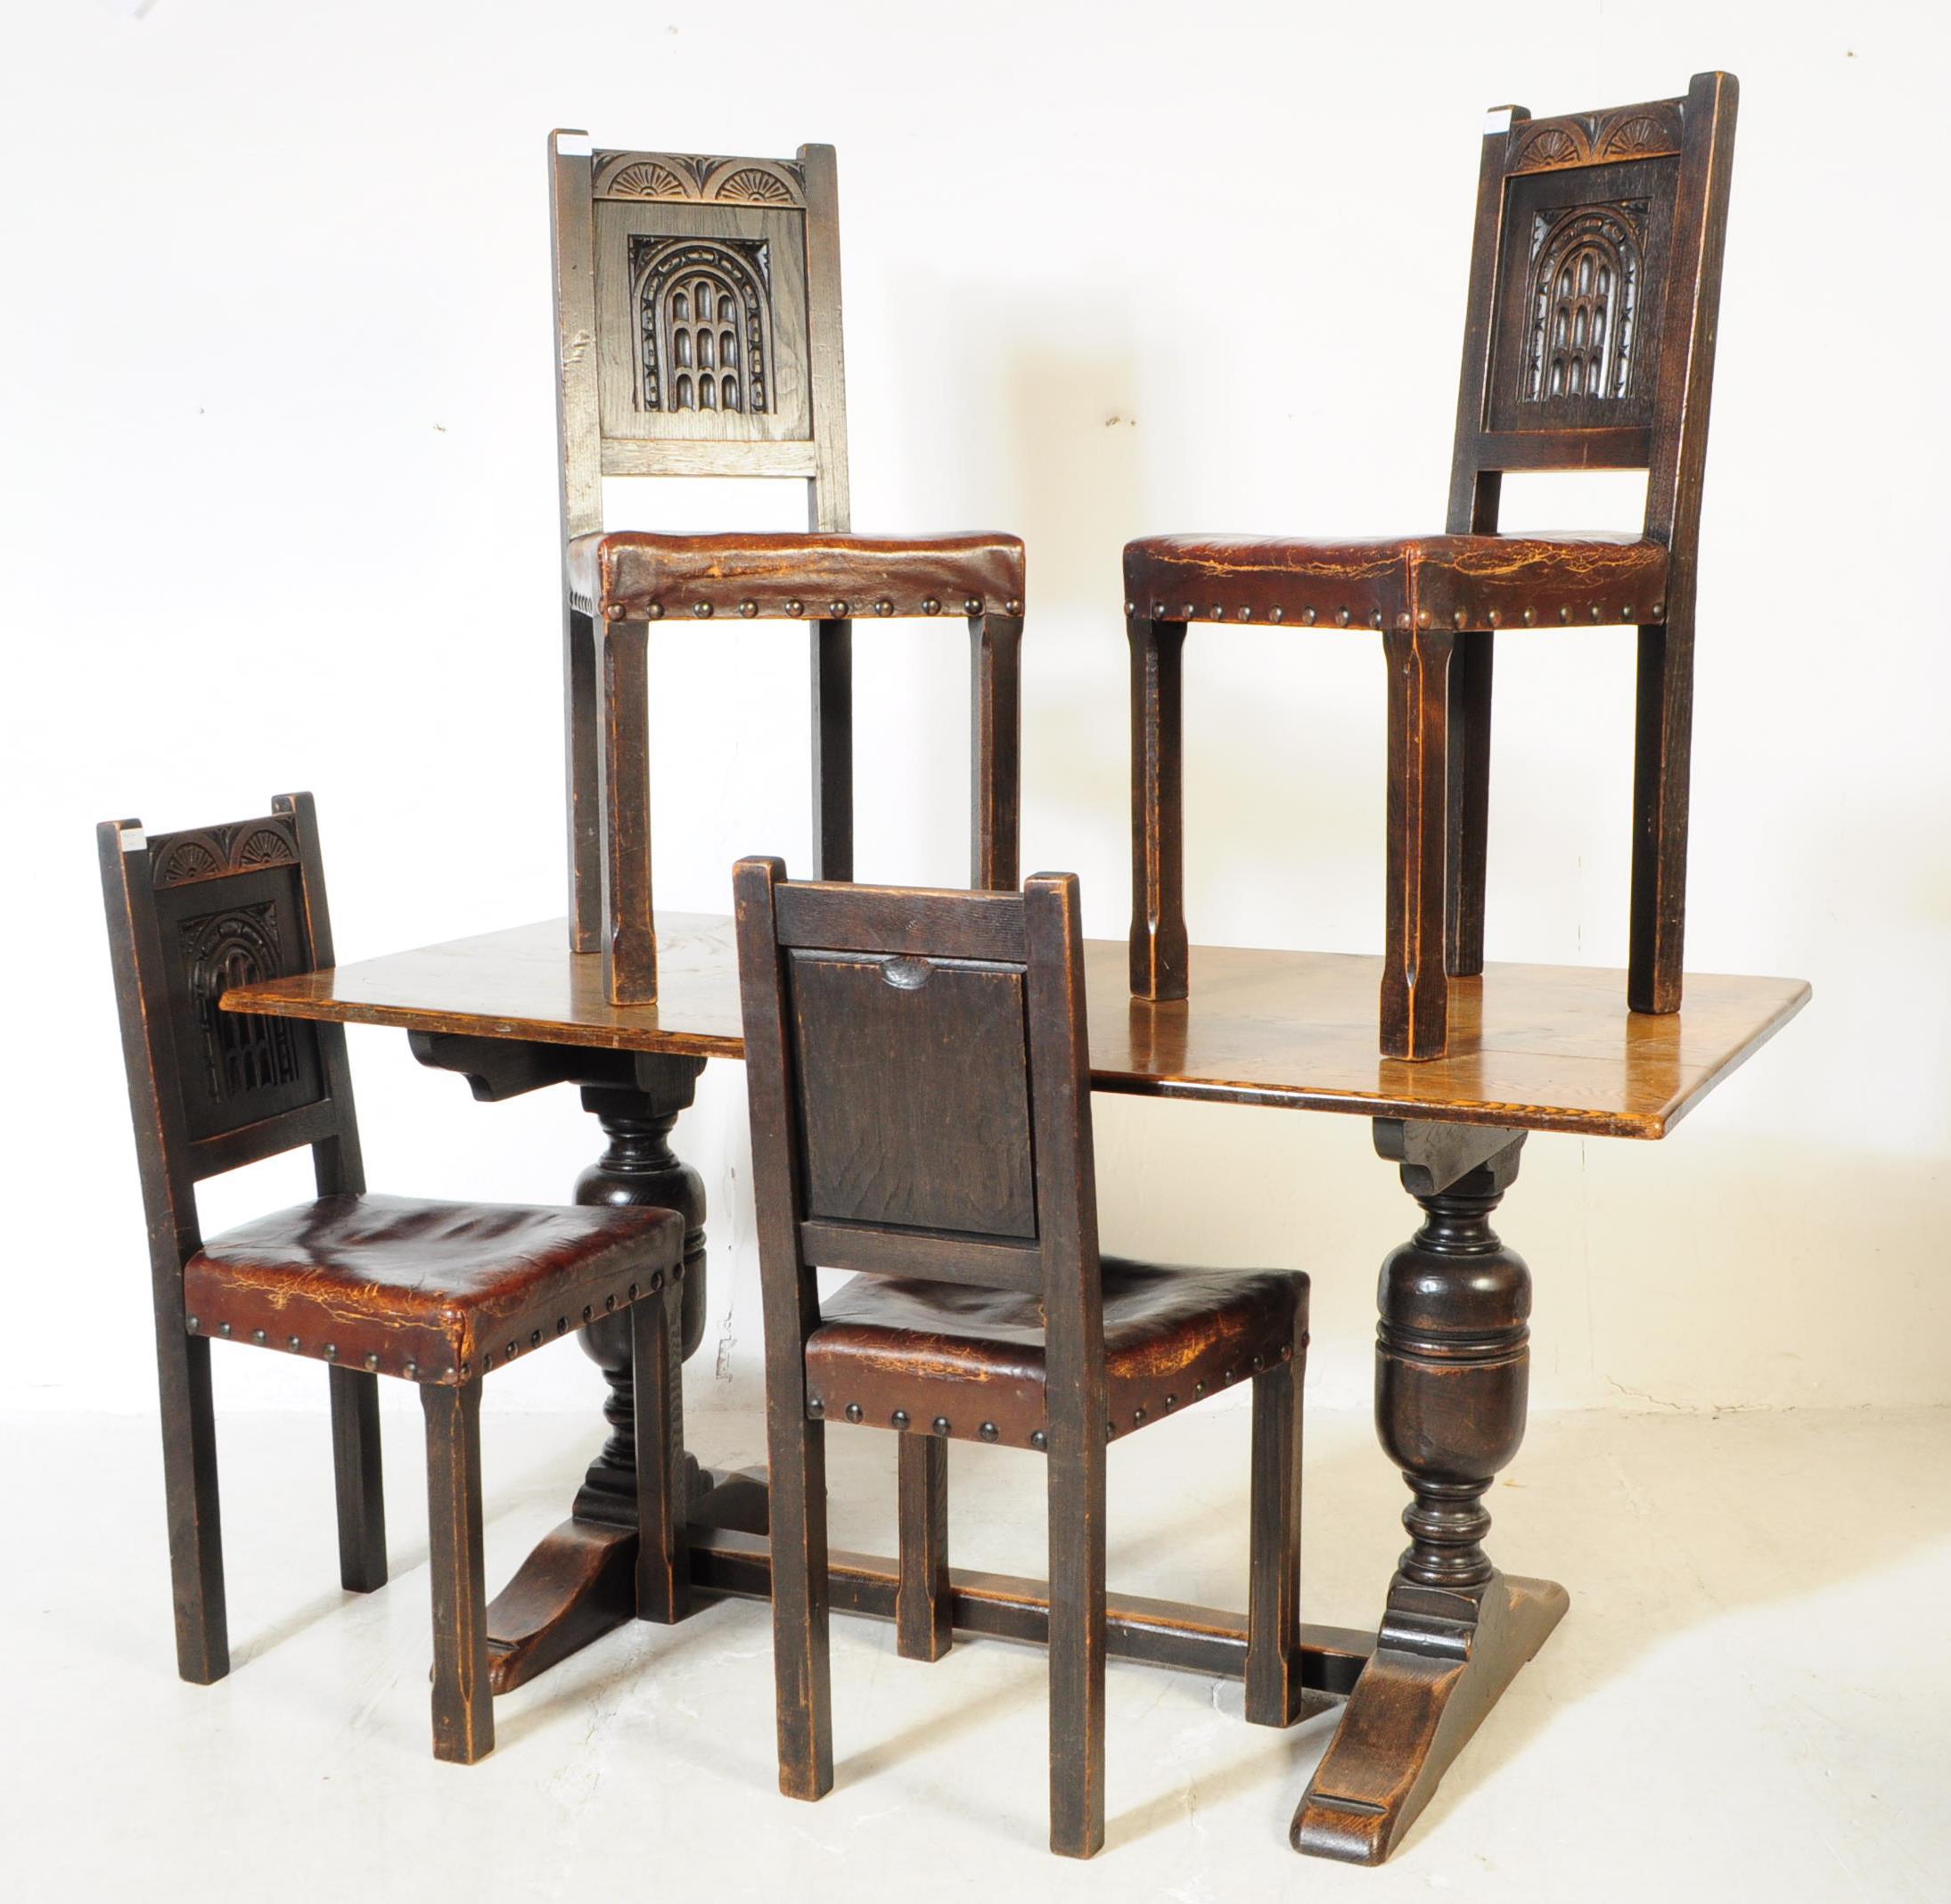 JACOBEAN REVIVAL OAK DINING TABLE & CHAIRS